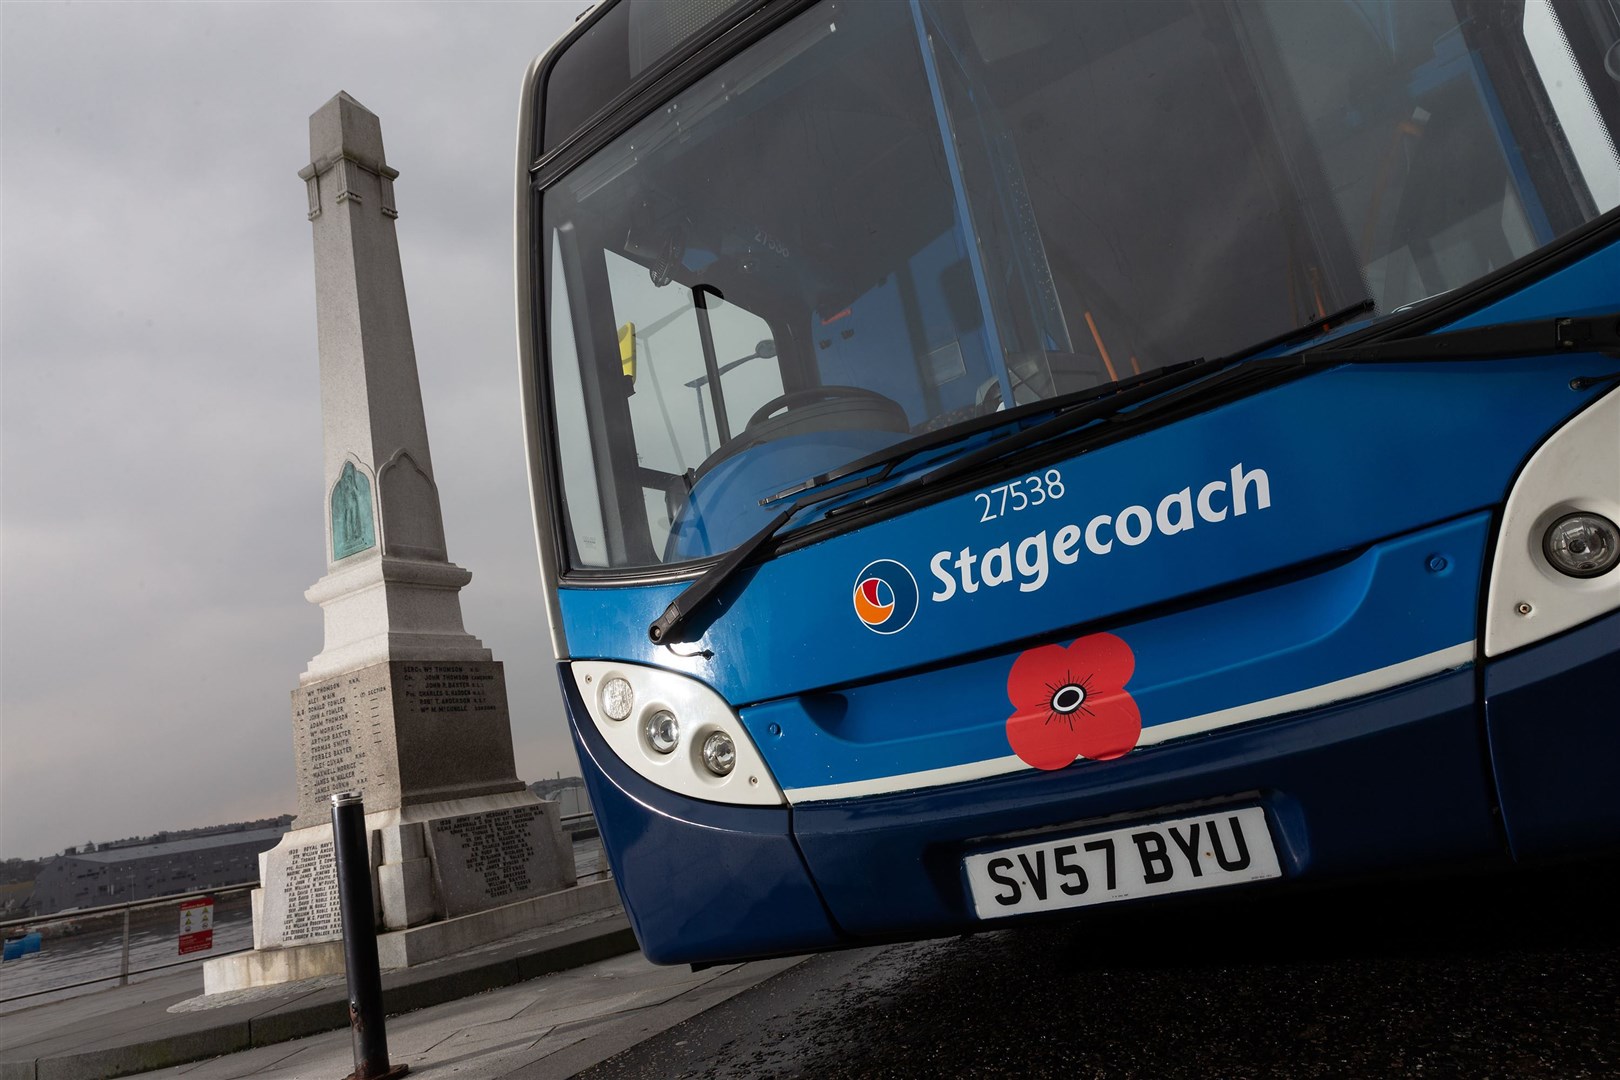 Stagecoach is supporting the British Legion Poppy Appeal.